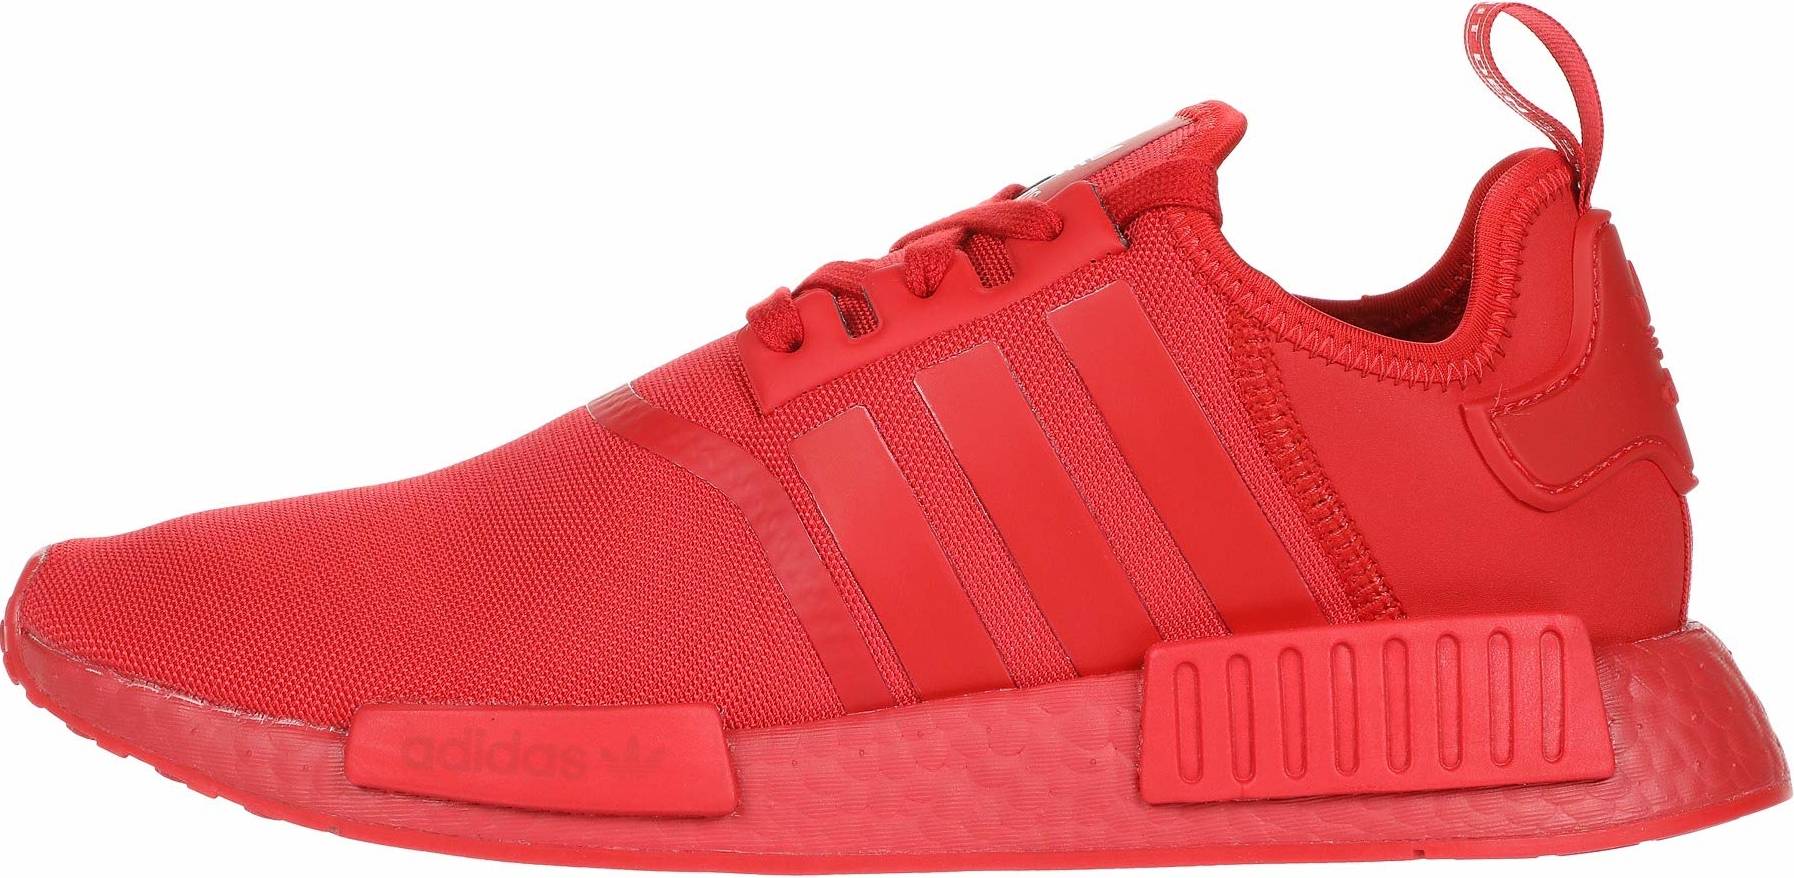 all red high top adidas